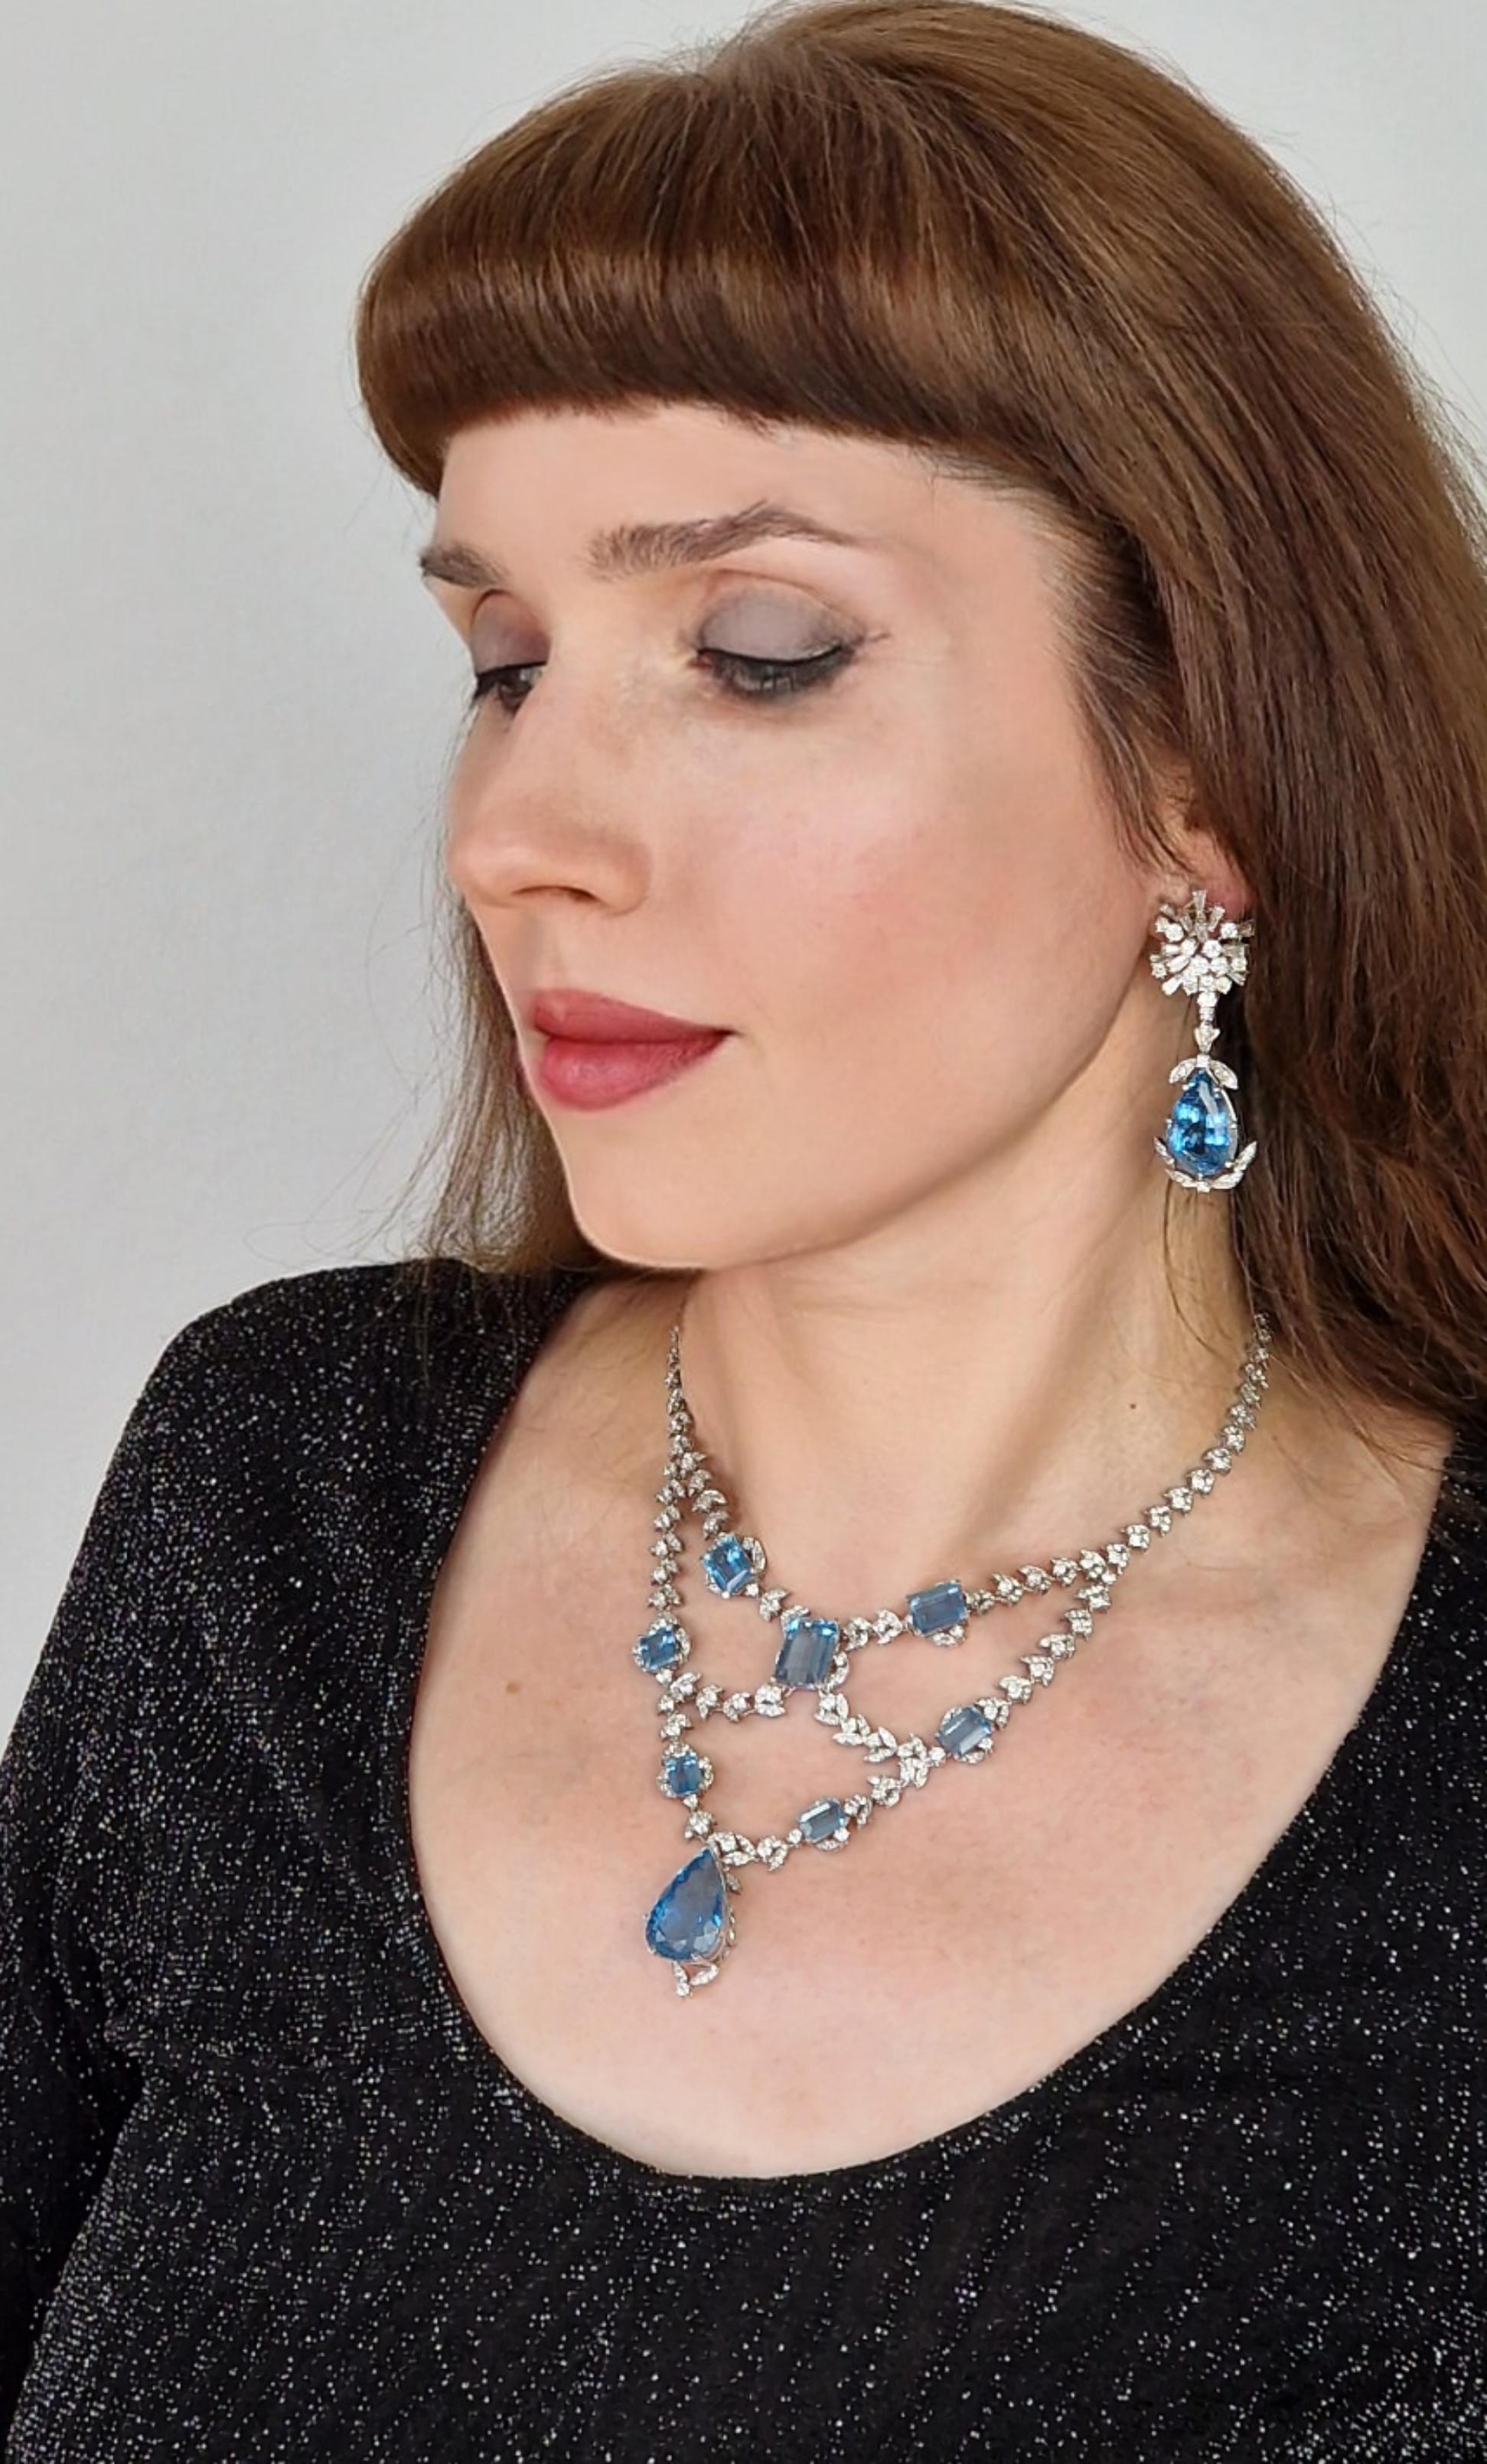 This wonderful pair of earrings features two perfectly matched dark blue aquamarine pear drops suspended from large sunburst clusters of brilliant and tapered baguette diamonds.

The length of the earrings is 6.7cms and they have a post and